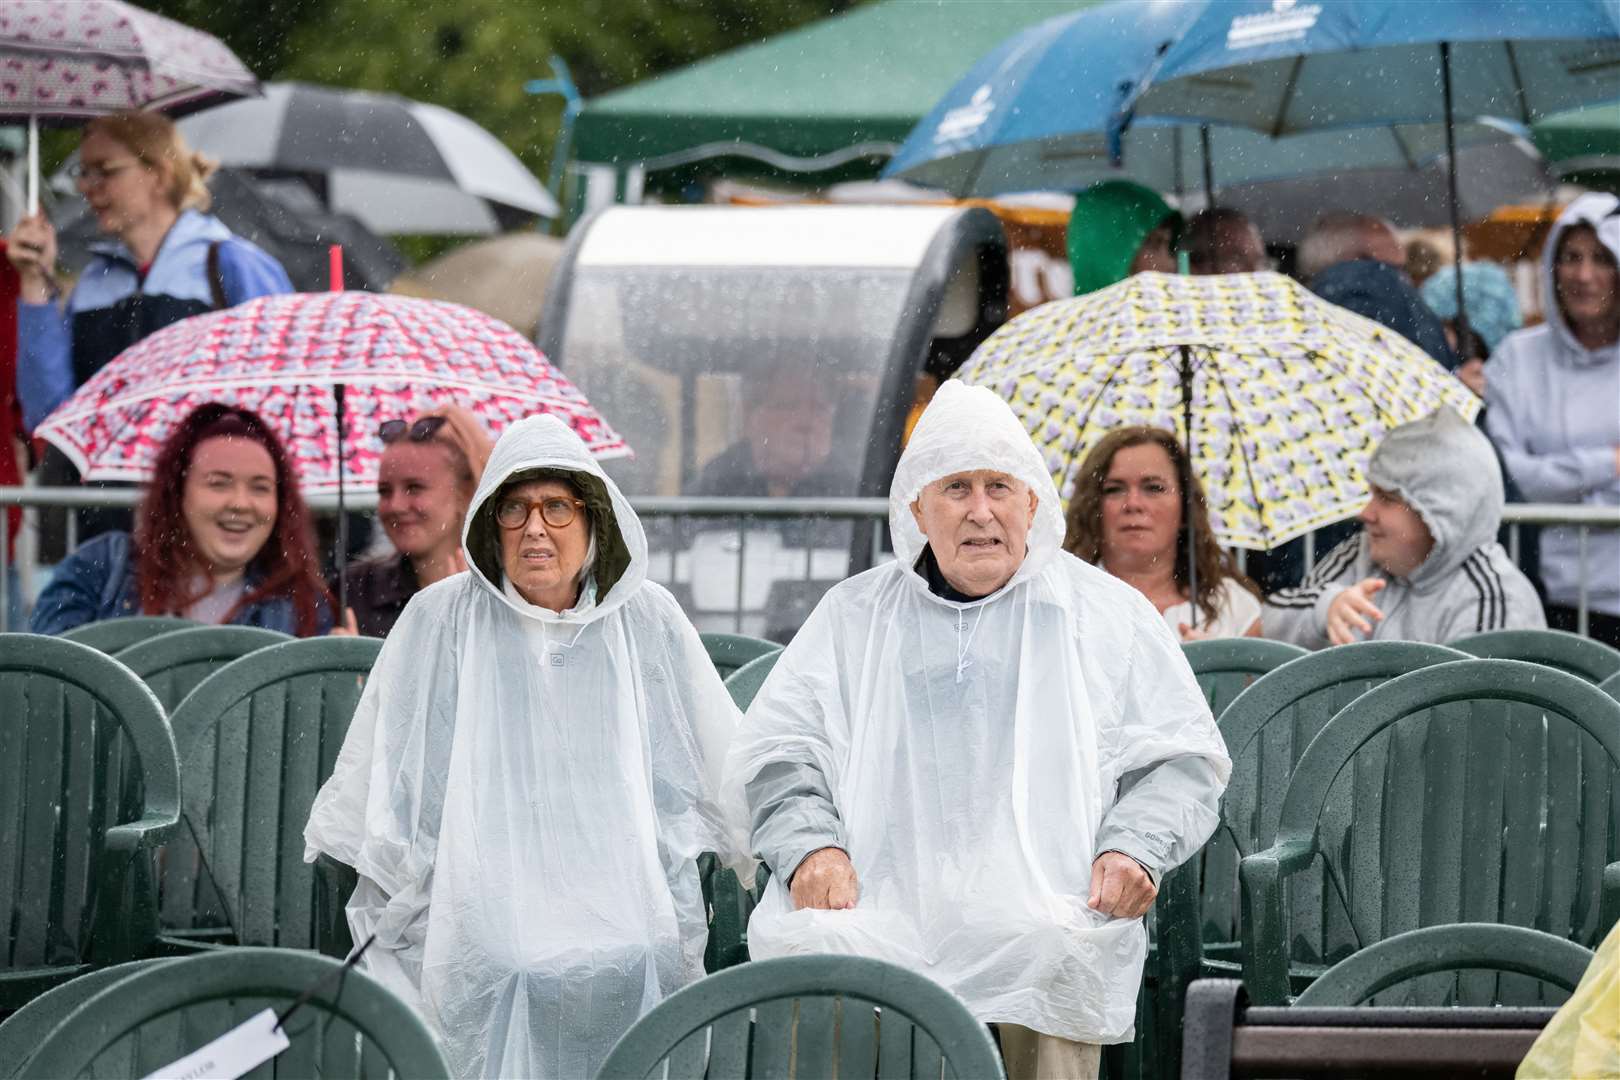 The crowd got soaking wet during a downpour. Picture: Daniel Forsyth